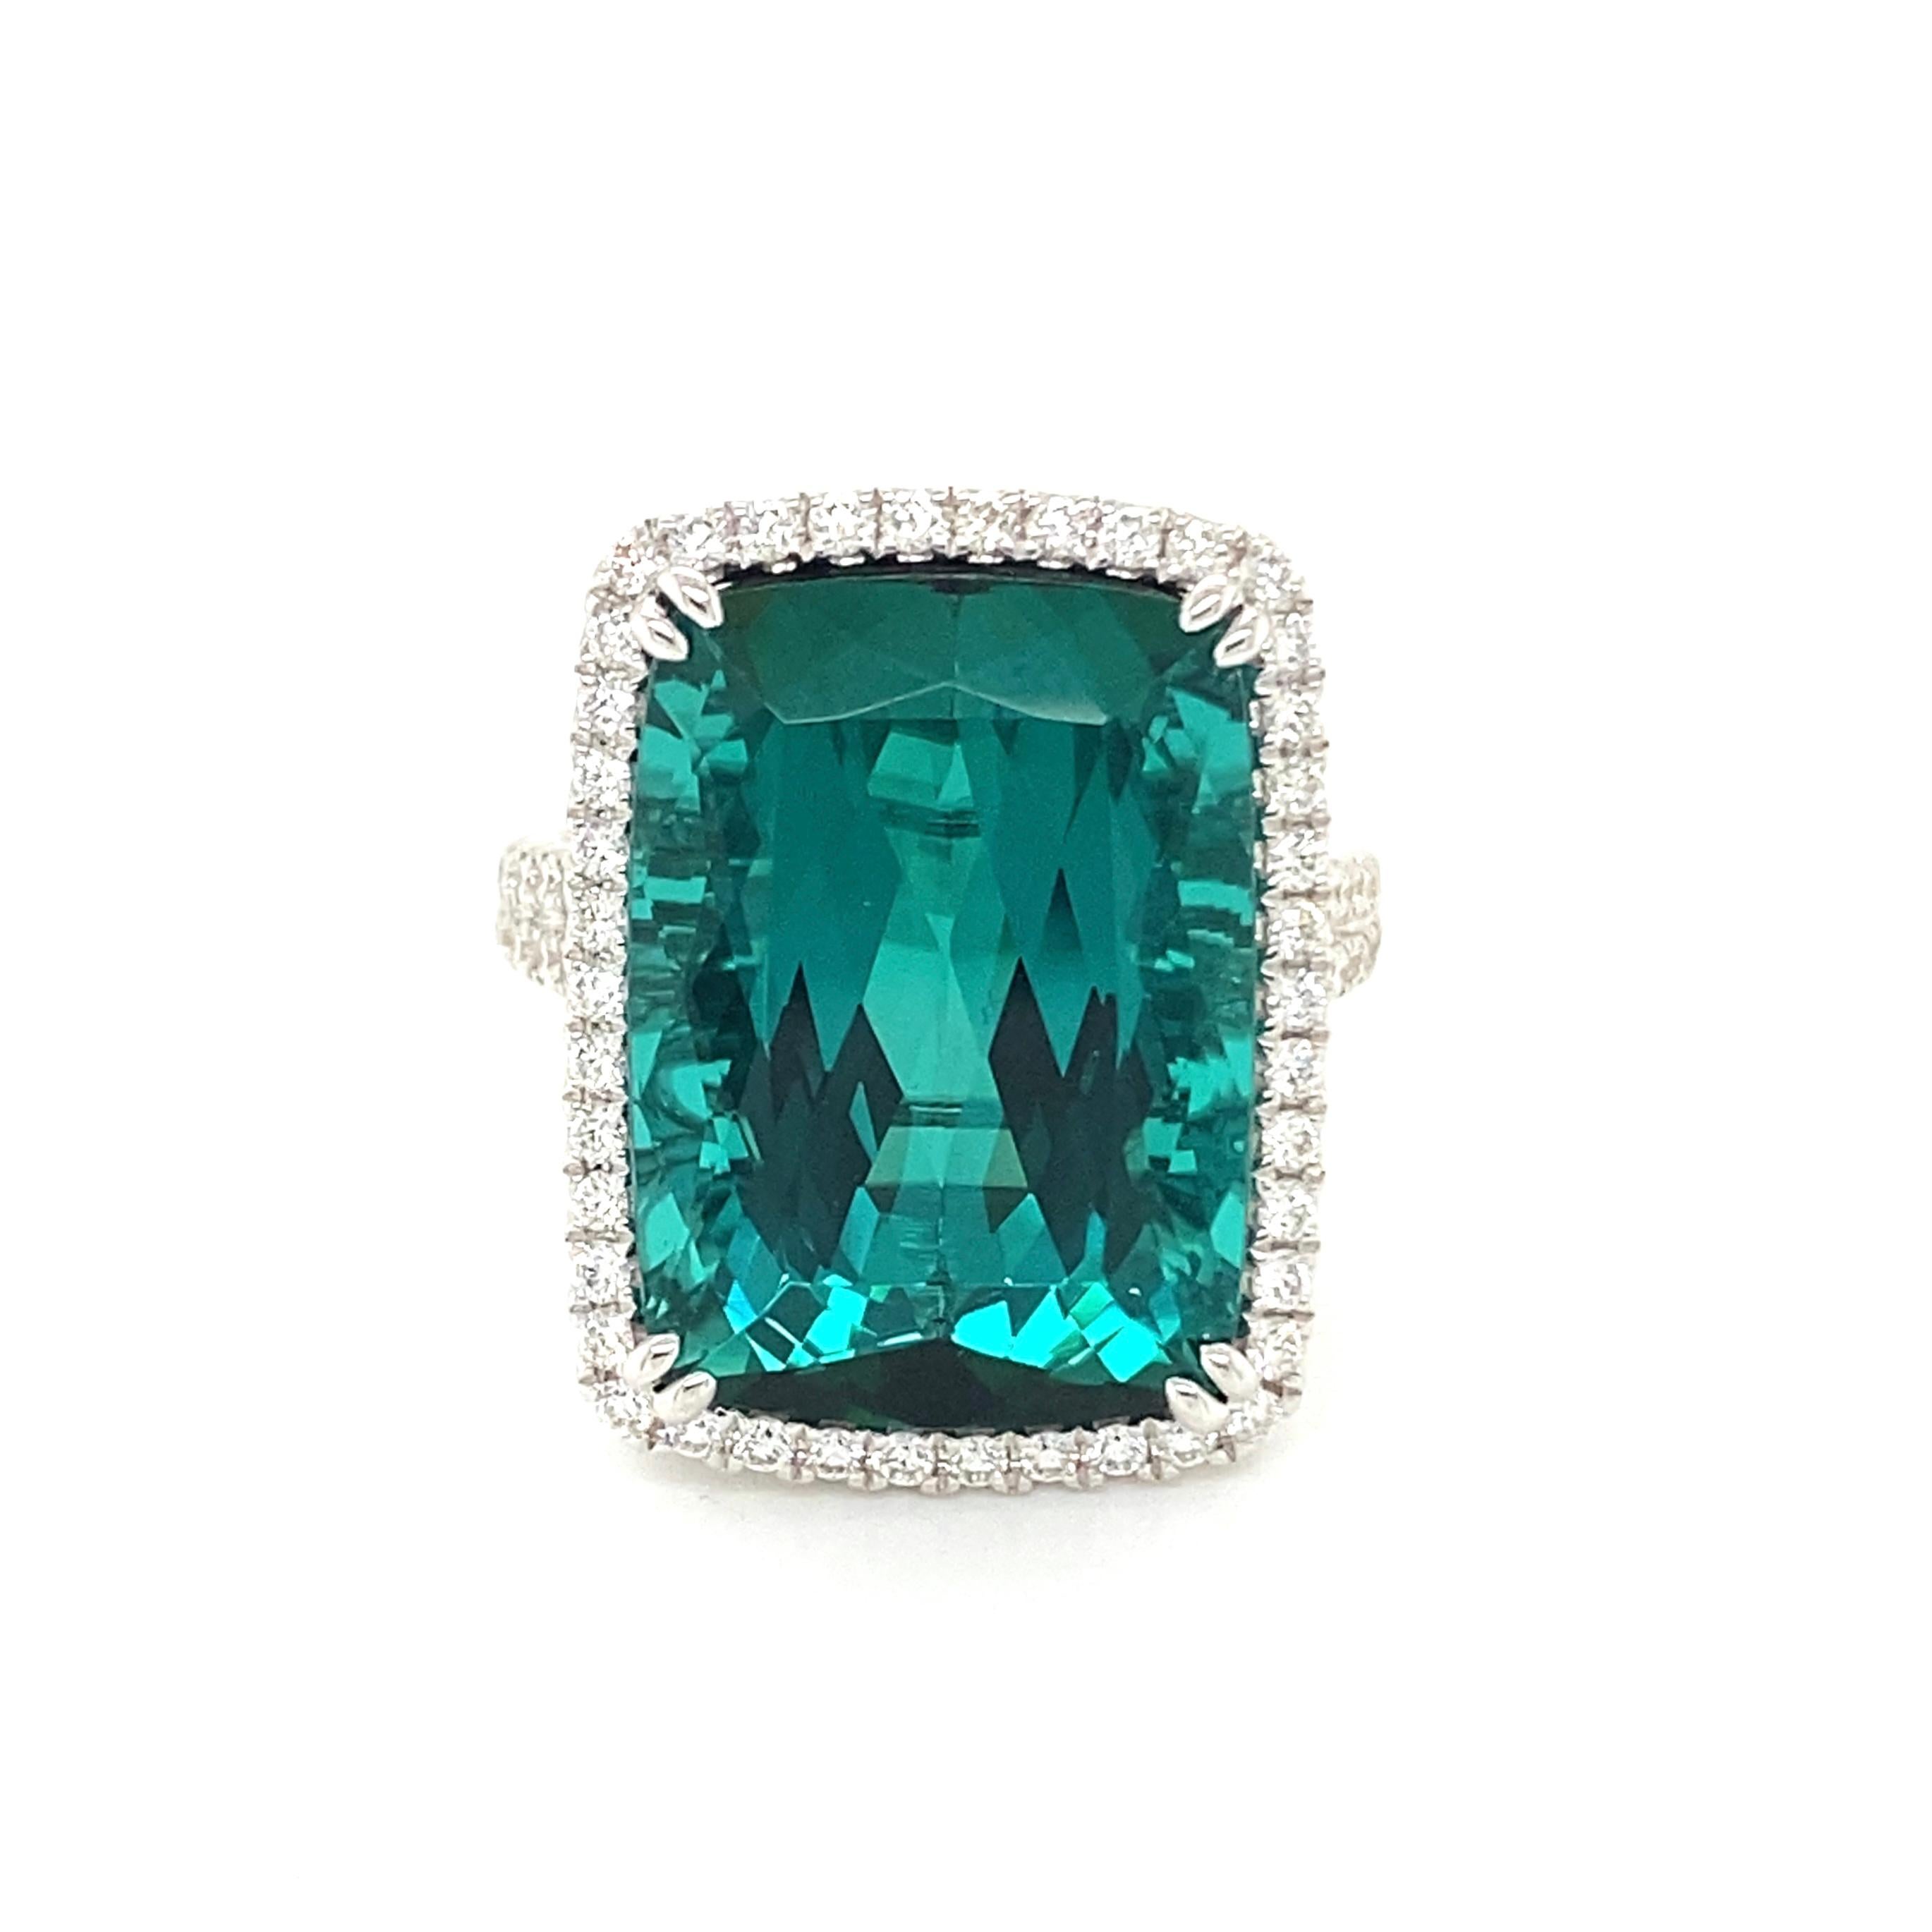 This stunning cocktail ring showcases a beautiful 17.25 Carat Cushion Blue Green Tourmaline with a Diamond Halo on a Double Diamond Shank. This ring is set in 18k white gold.
Total Diamond Weight = 0.83 Carats. Ring Size is 6 1/2.